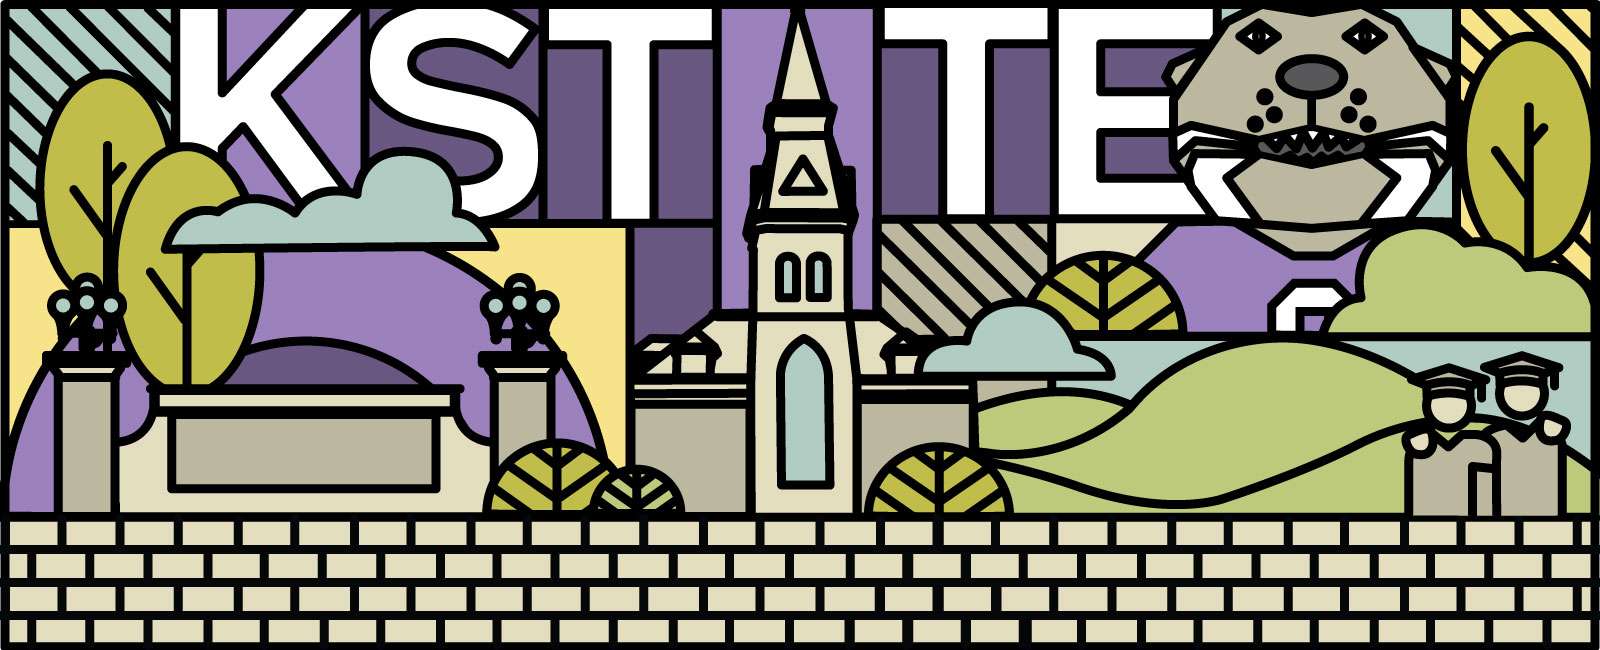 Mosaic illustration of K-State, Willie the Wildcat, Higgenbottom Gate, two graduates